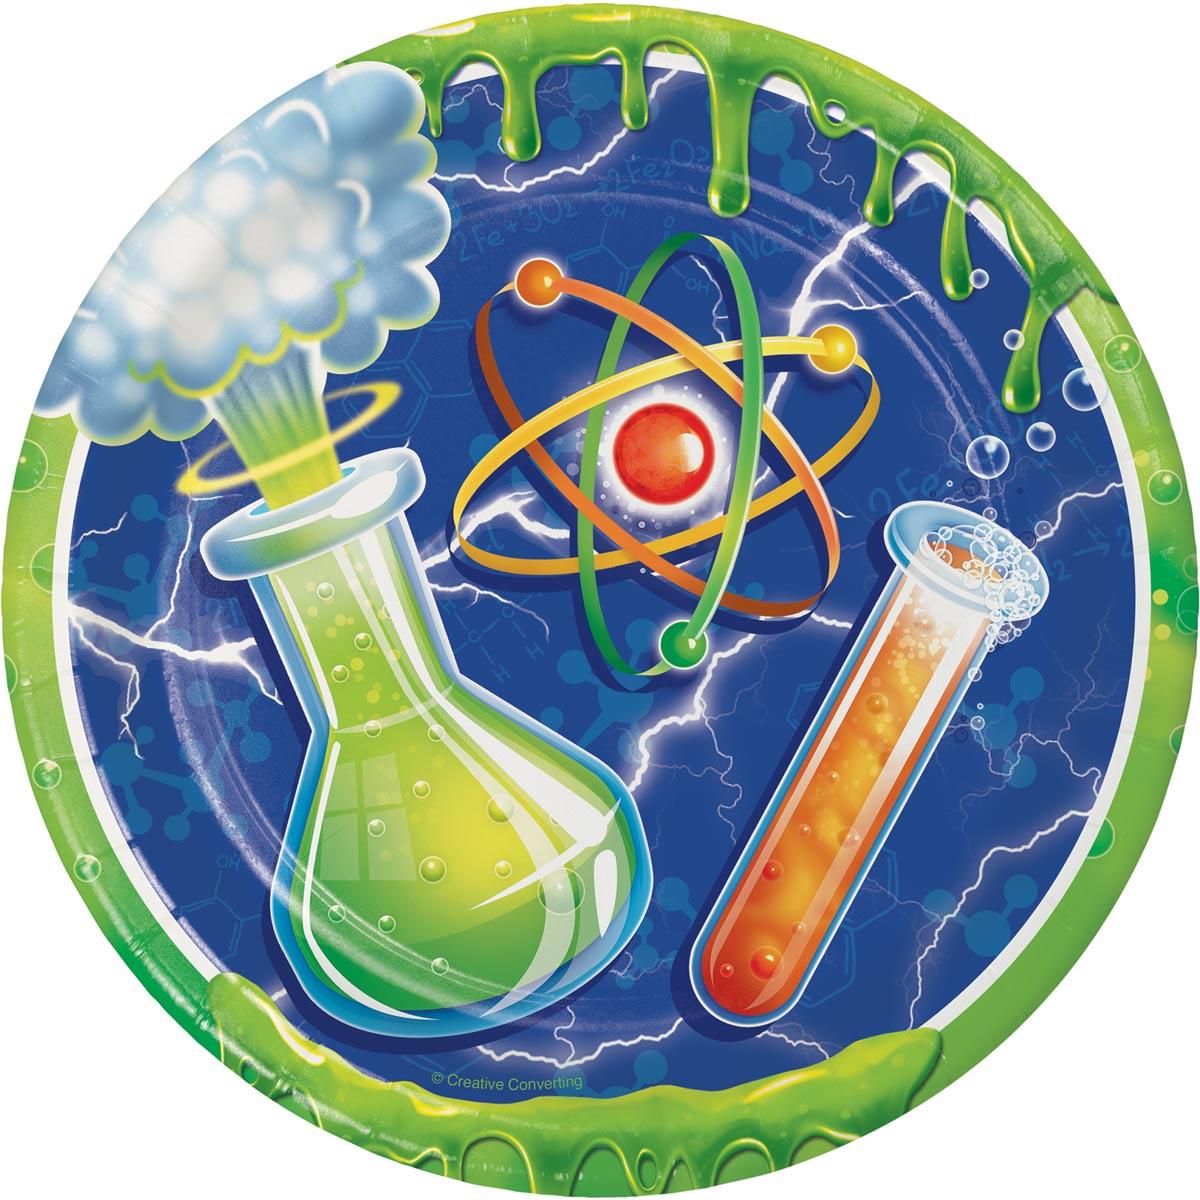 Mad Scientist 7" Luncheon Paper Plates by Creative Party 317532 available here at Karnival Costumes online party shop